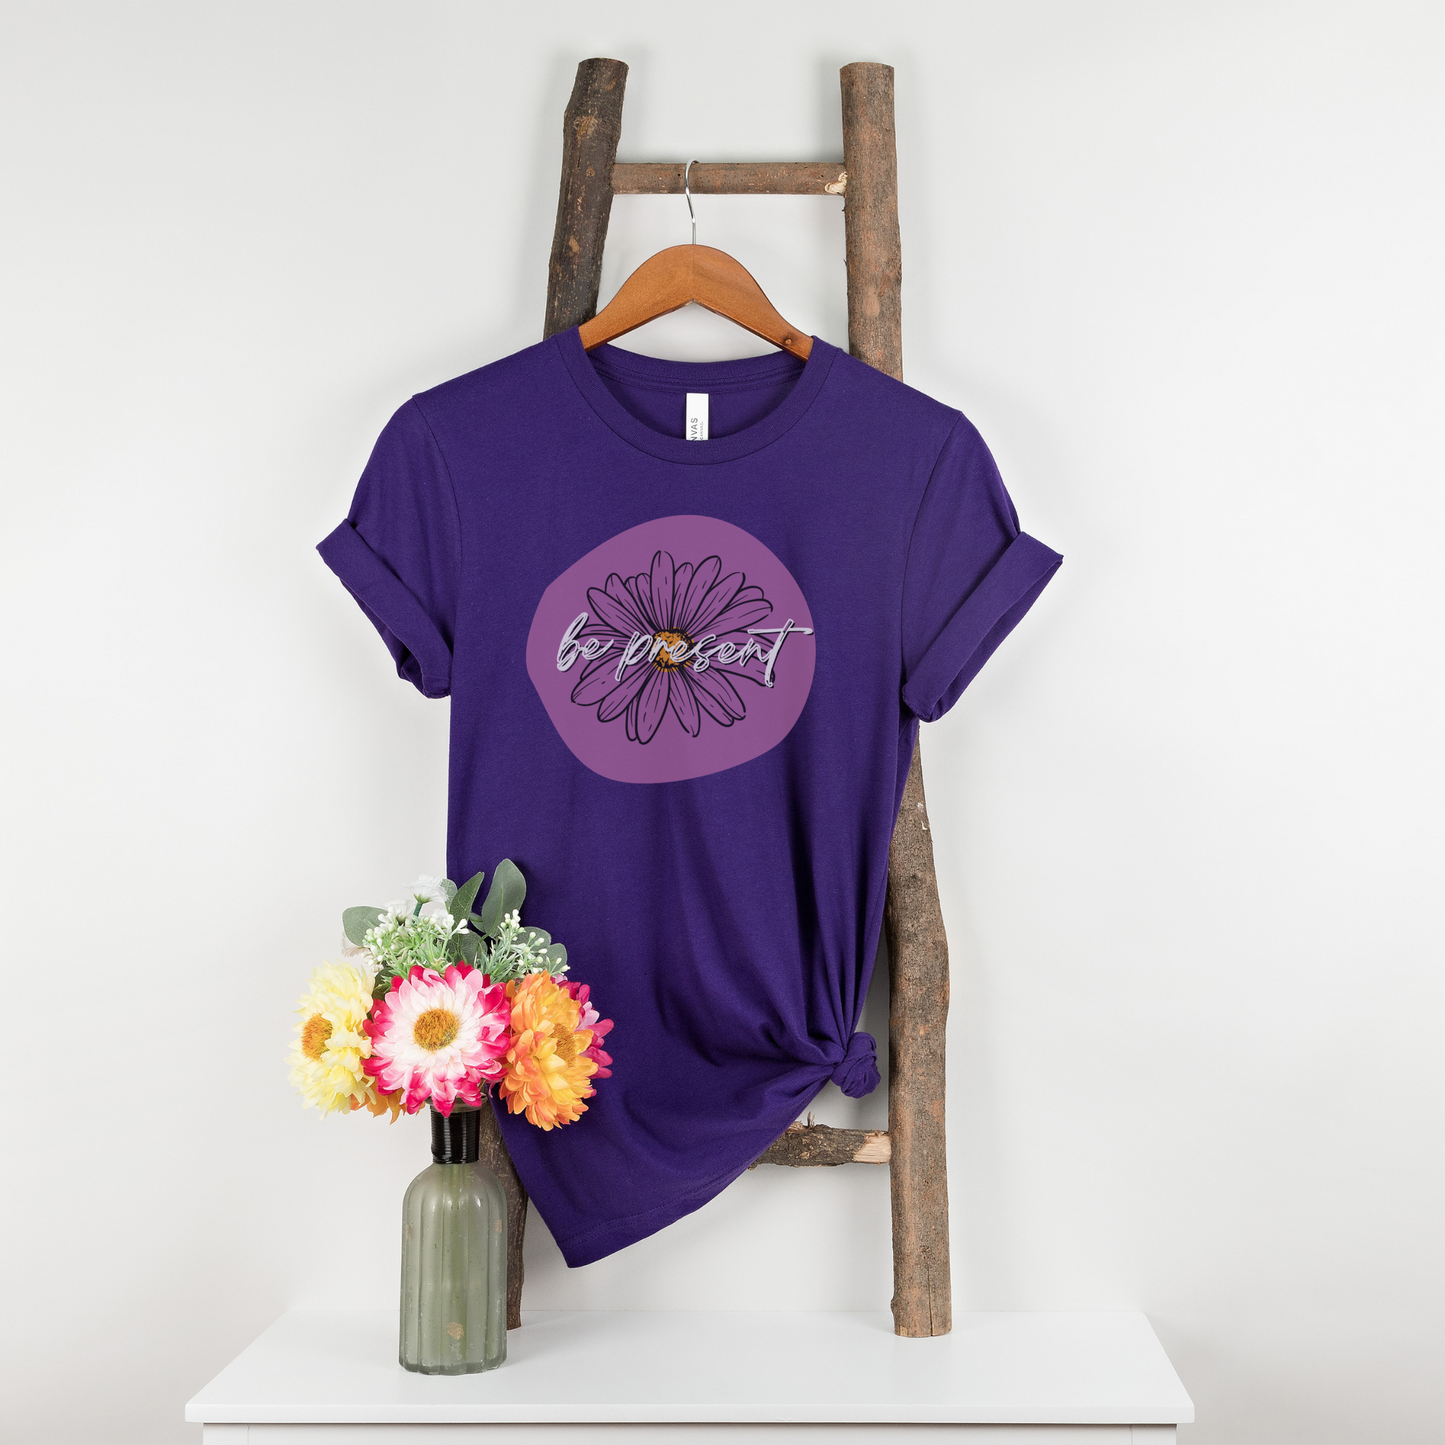 Be Present Purple Daisy Floral Positive Message Happy Thoughts Unisex Jersey Short Sleeve Tee Small-3XL